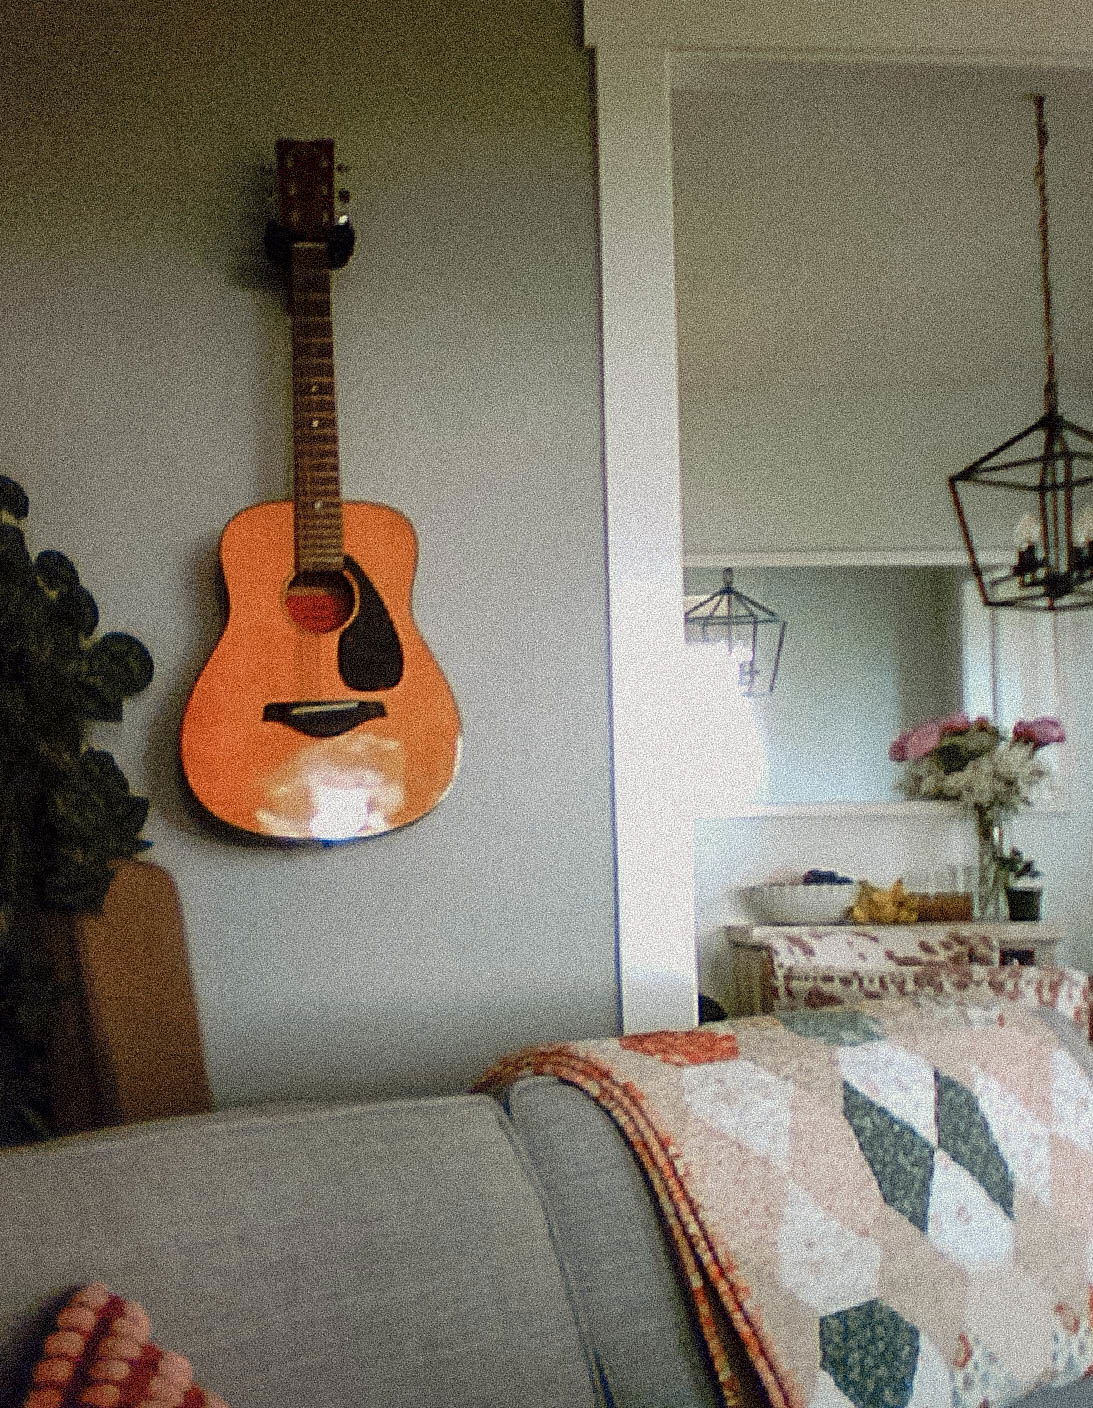 An acoustic guitar hangs on a wall above a gray couch with a quilt, while a dining area with flowers and pendant lights is visible in the background.